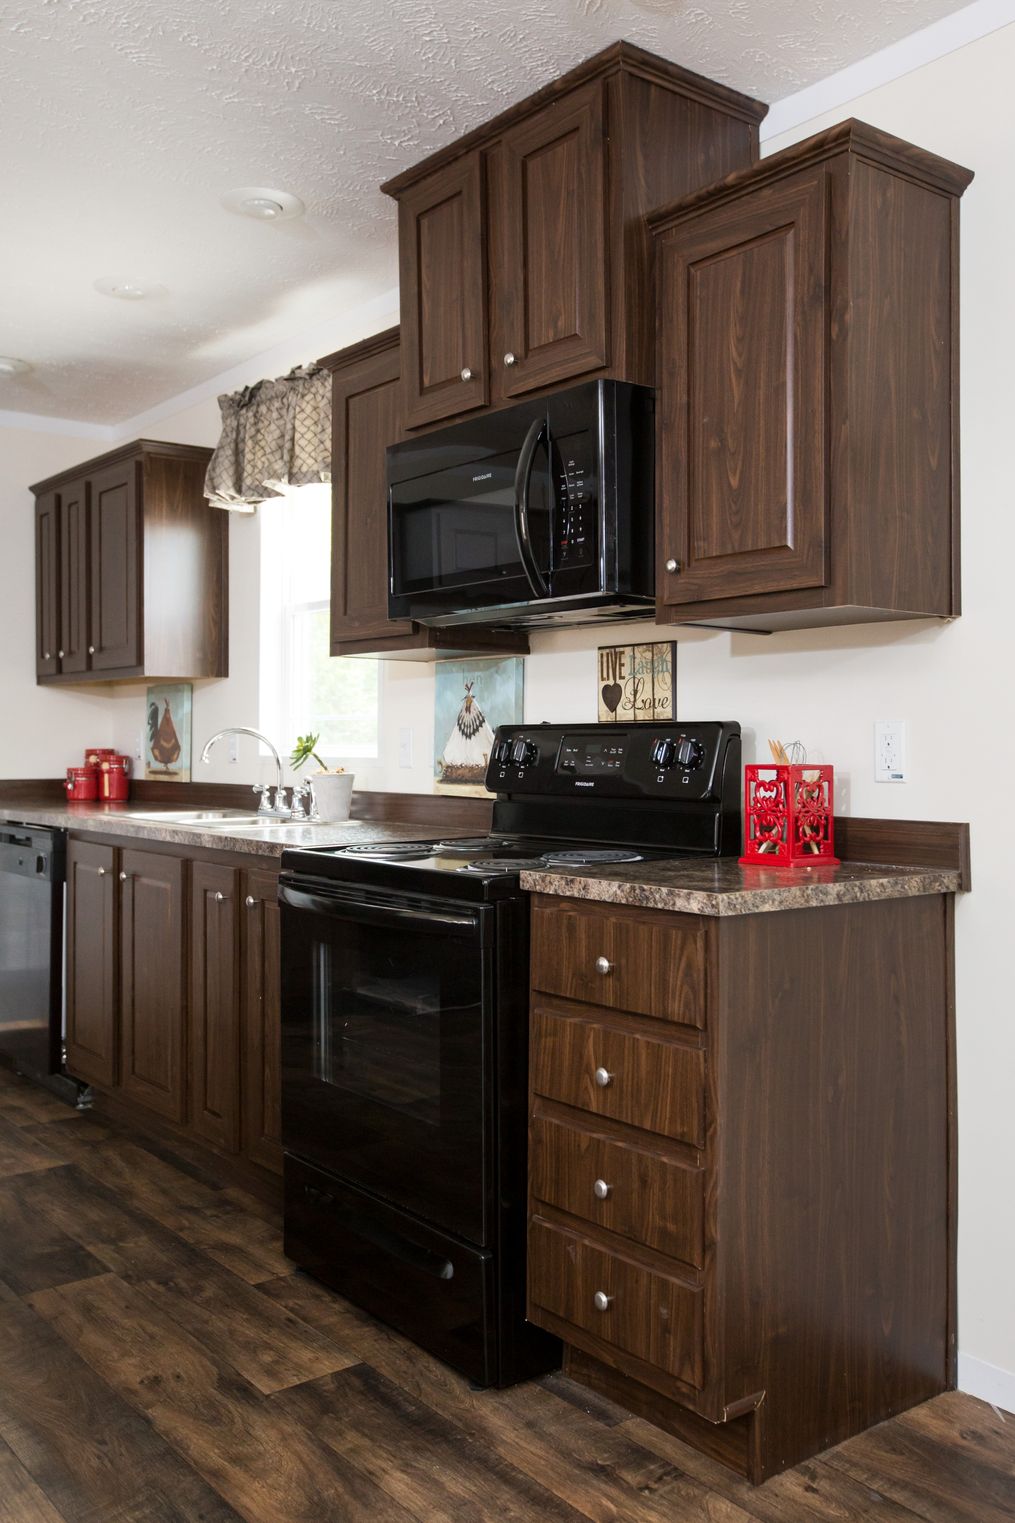 The RANGER 56B Kitchen. This Manufactured Mobile Home features 3 bedrooms and 2 baths.